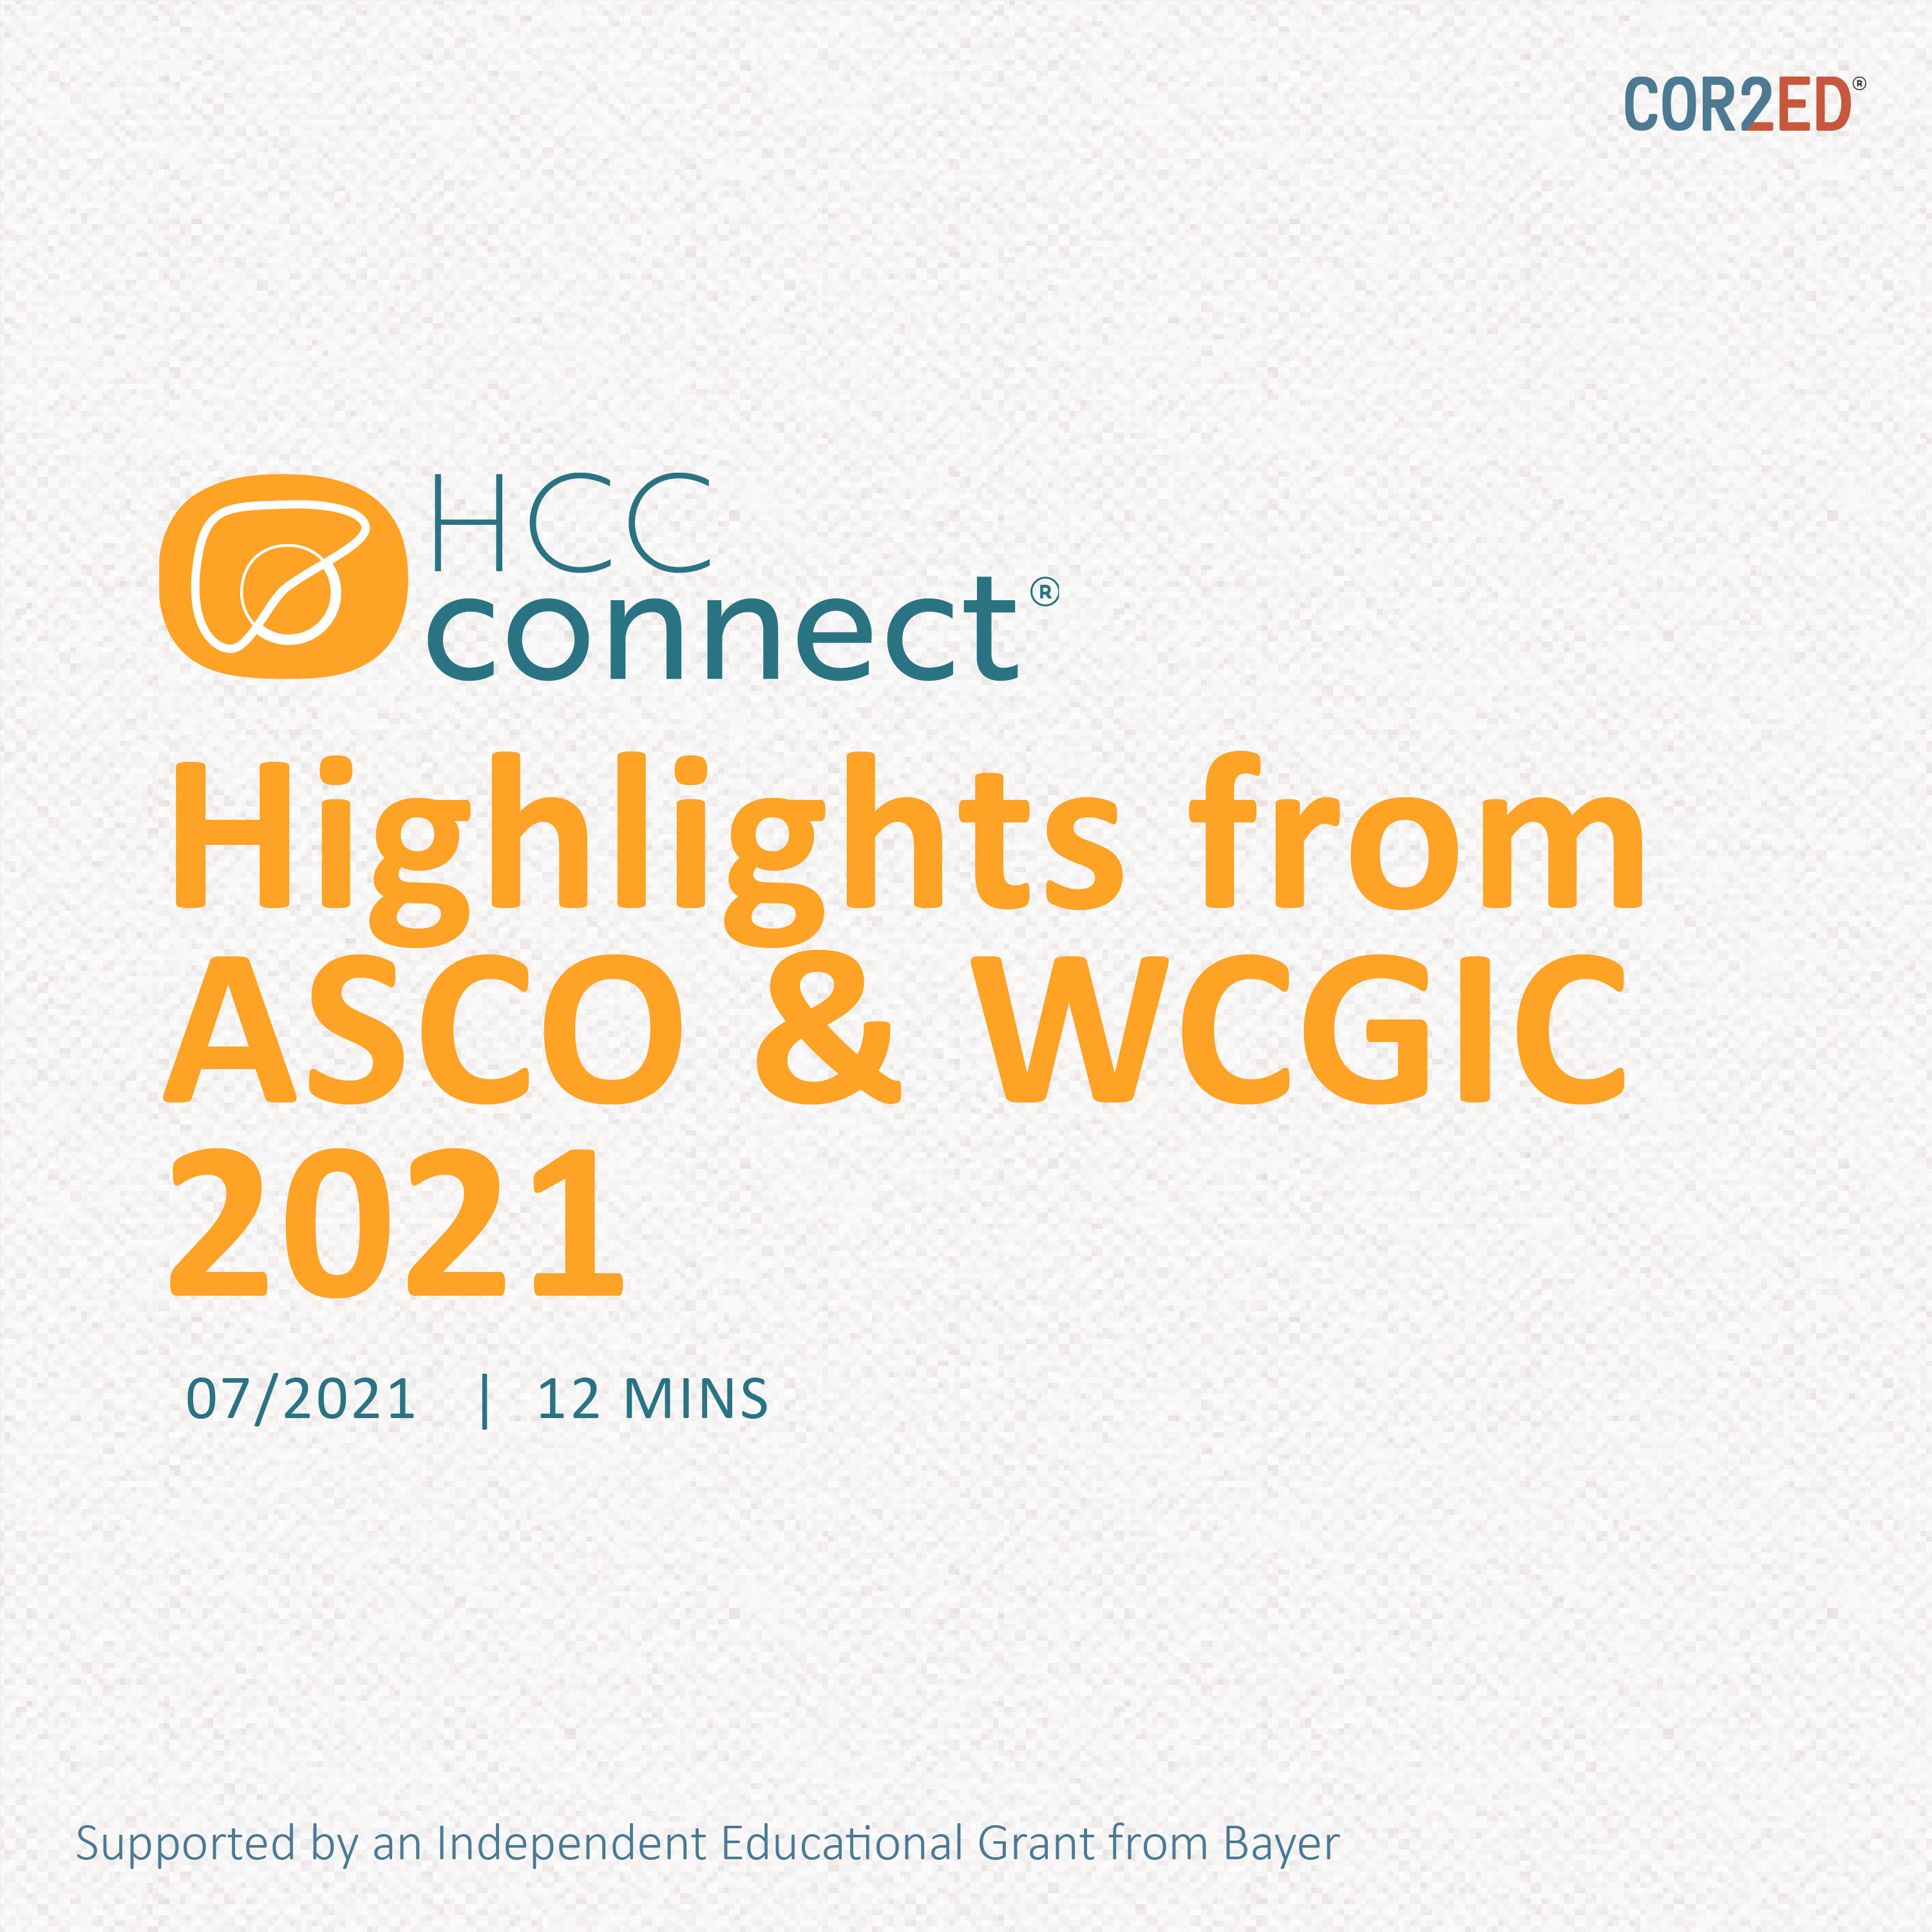 Hepatocellular carcinoma highlights from ASCO and WCGIC 2021